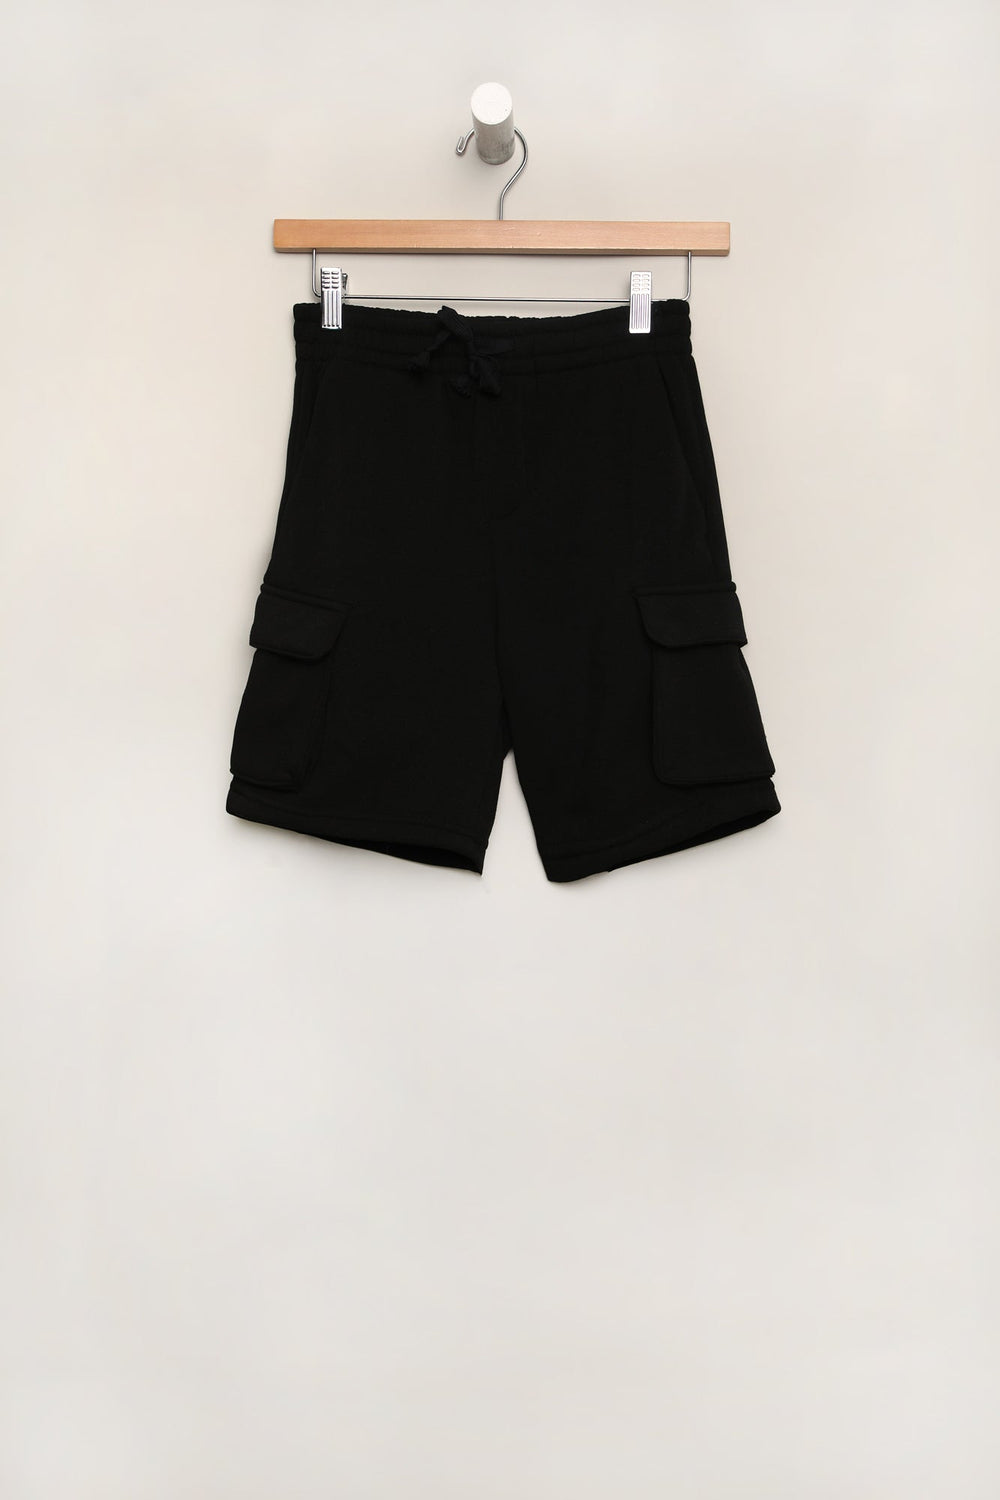 West49 Youth Fleece Solid Colour Cargo Shorts West49 Youth Fleece Solid Colour Cargo Shorts